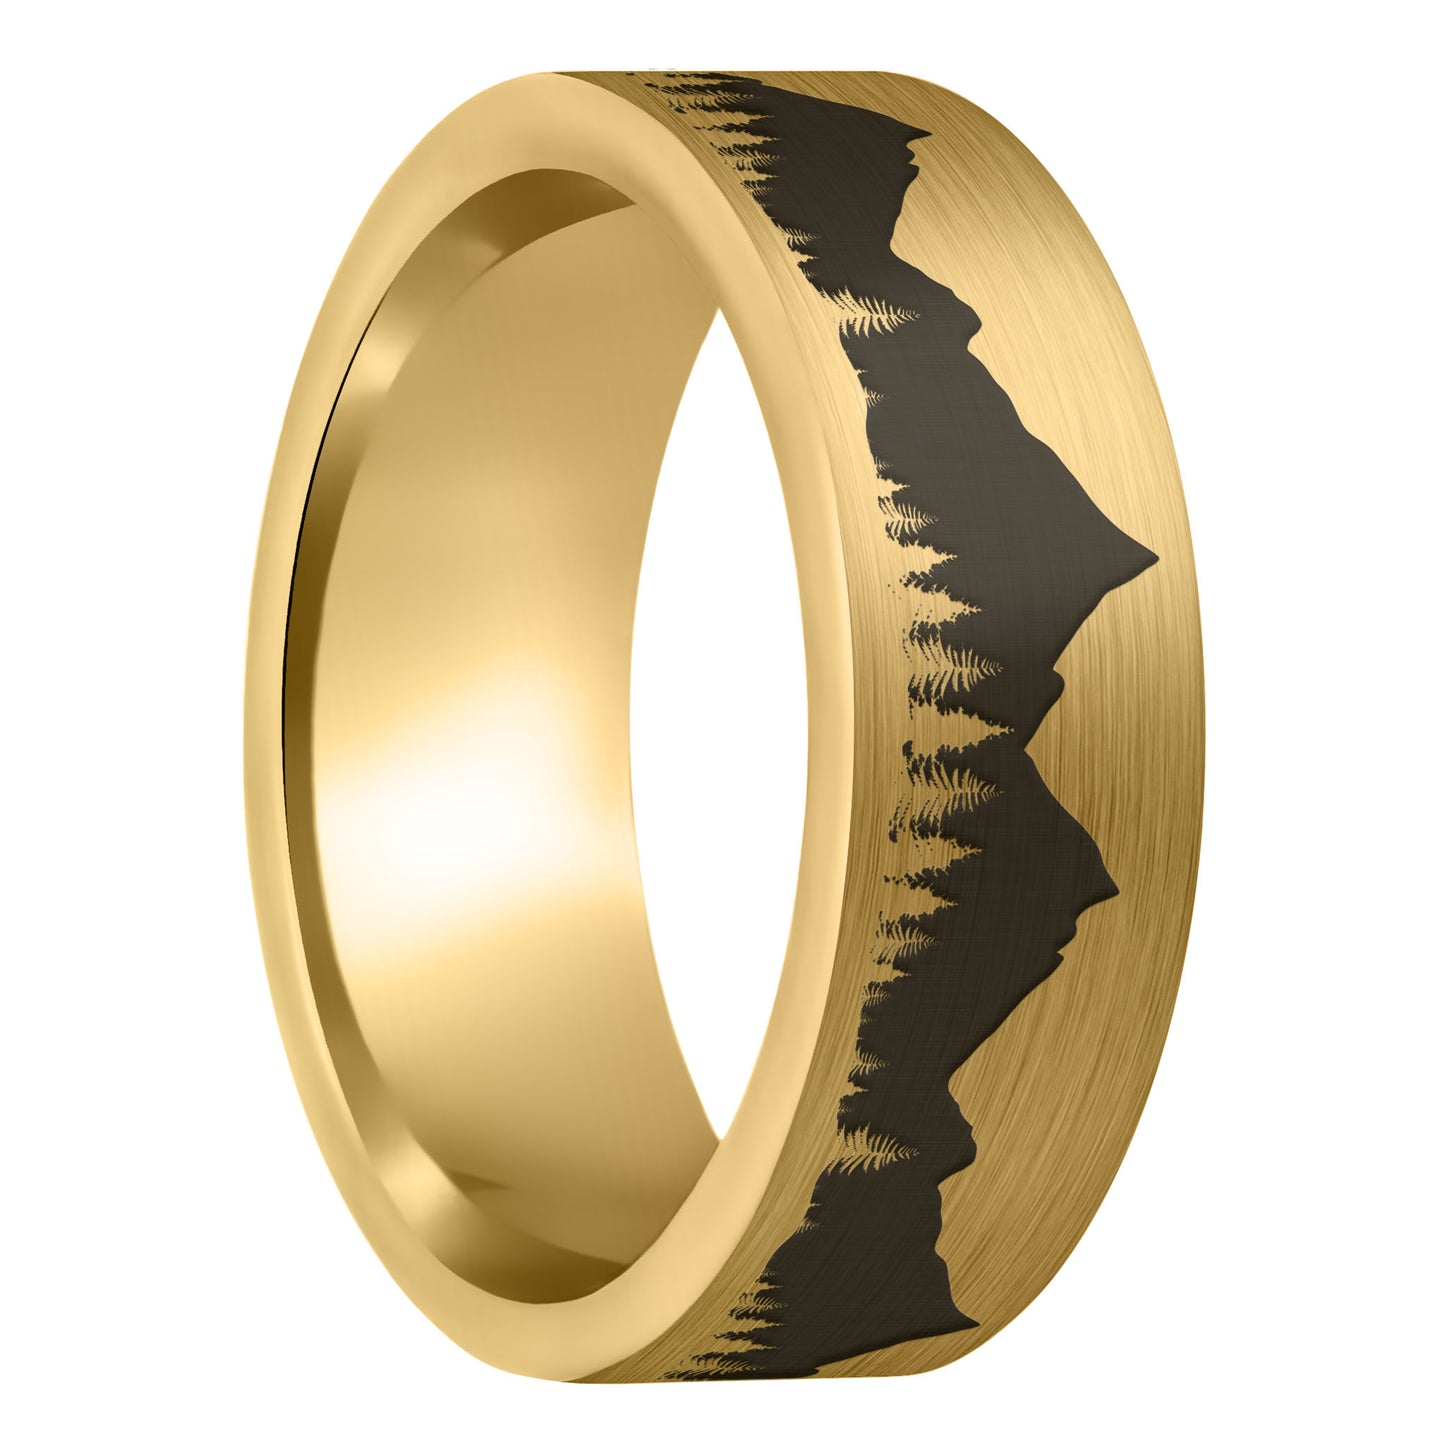 A treeline mountains brushed gold tungsten men's wedding band displayed on a plain white background.